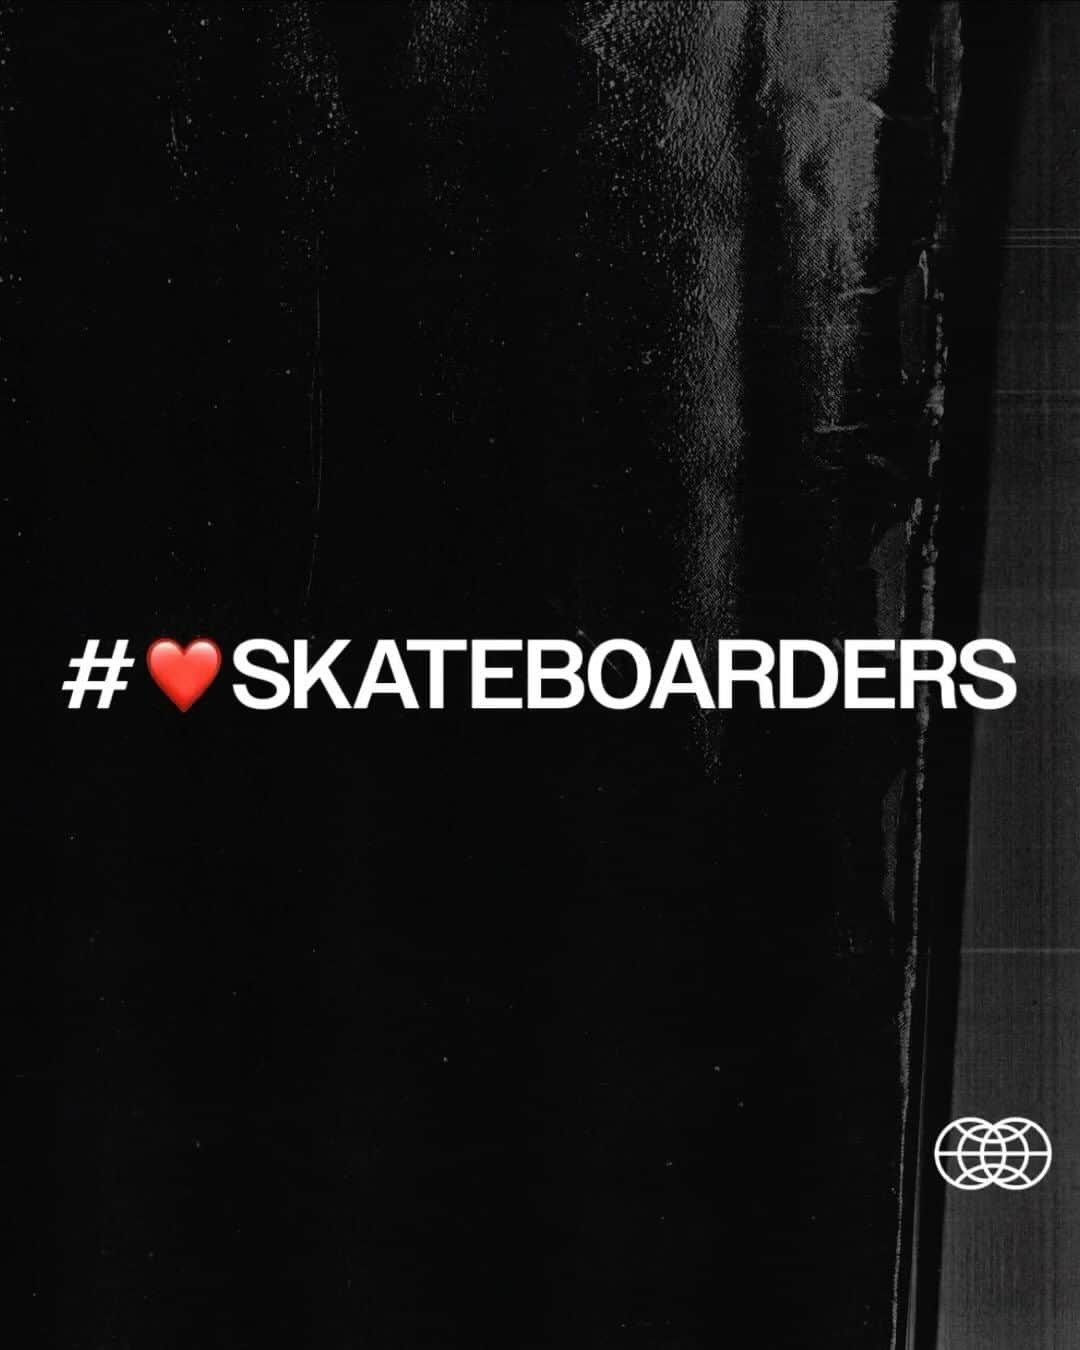 The Berricsのインスタグラム：「Every day we’re going to look at  #❤️skateboarders and pull what we see and feature them on our page, no matter who they are, what they’re doing or what level of skateboarding they’re at, because we love you, appreciate you, and you’re important to the survival of skateboarding as a whole, even if you don’t know it yet. - sb   1) @alexkililis - Picture perfect spot 🏔️   2) @stelliotheyap - Blasted Bs 360 🚀   3) @222riaa - Park Edit 👏   4) @u.hate.caylik - Learning Flatground in the store 💪   5) @yurin_fujii - Weekend slide 🛝   #❤️skateboarders #berrics #skateboardingisfun」